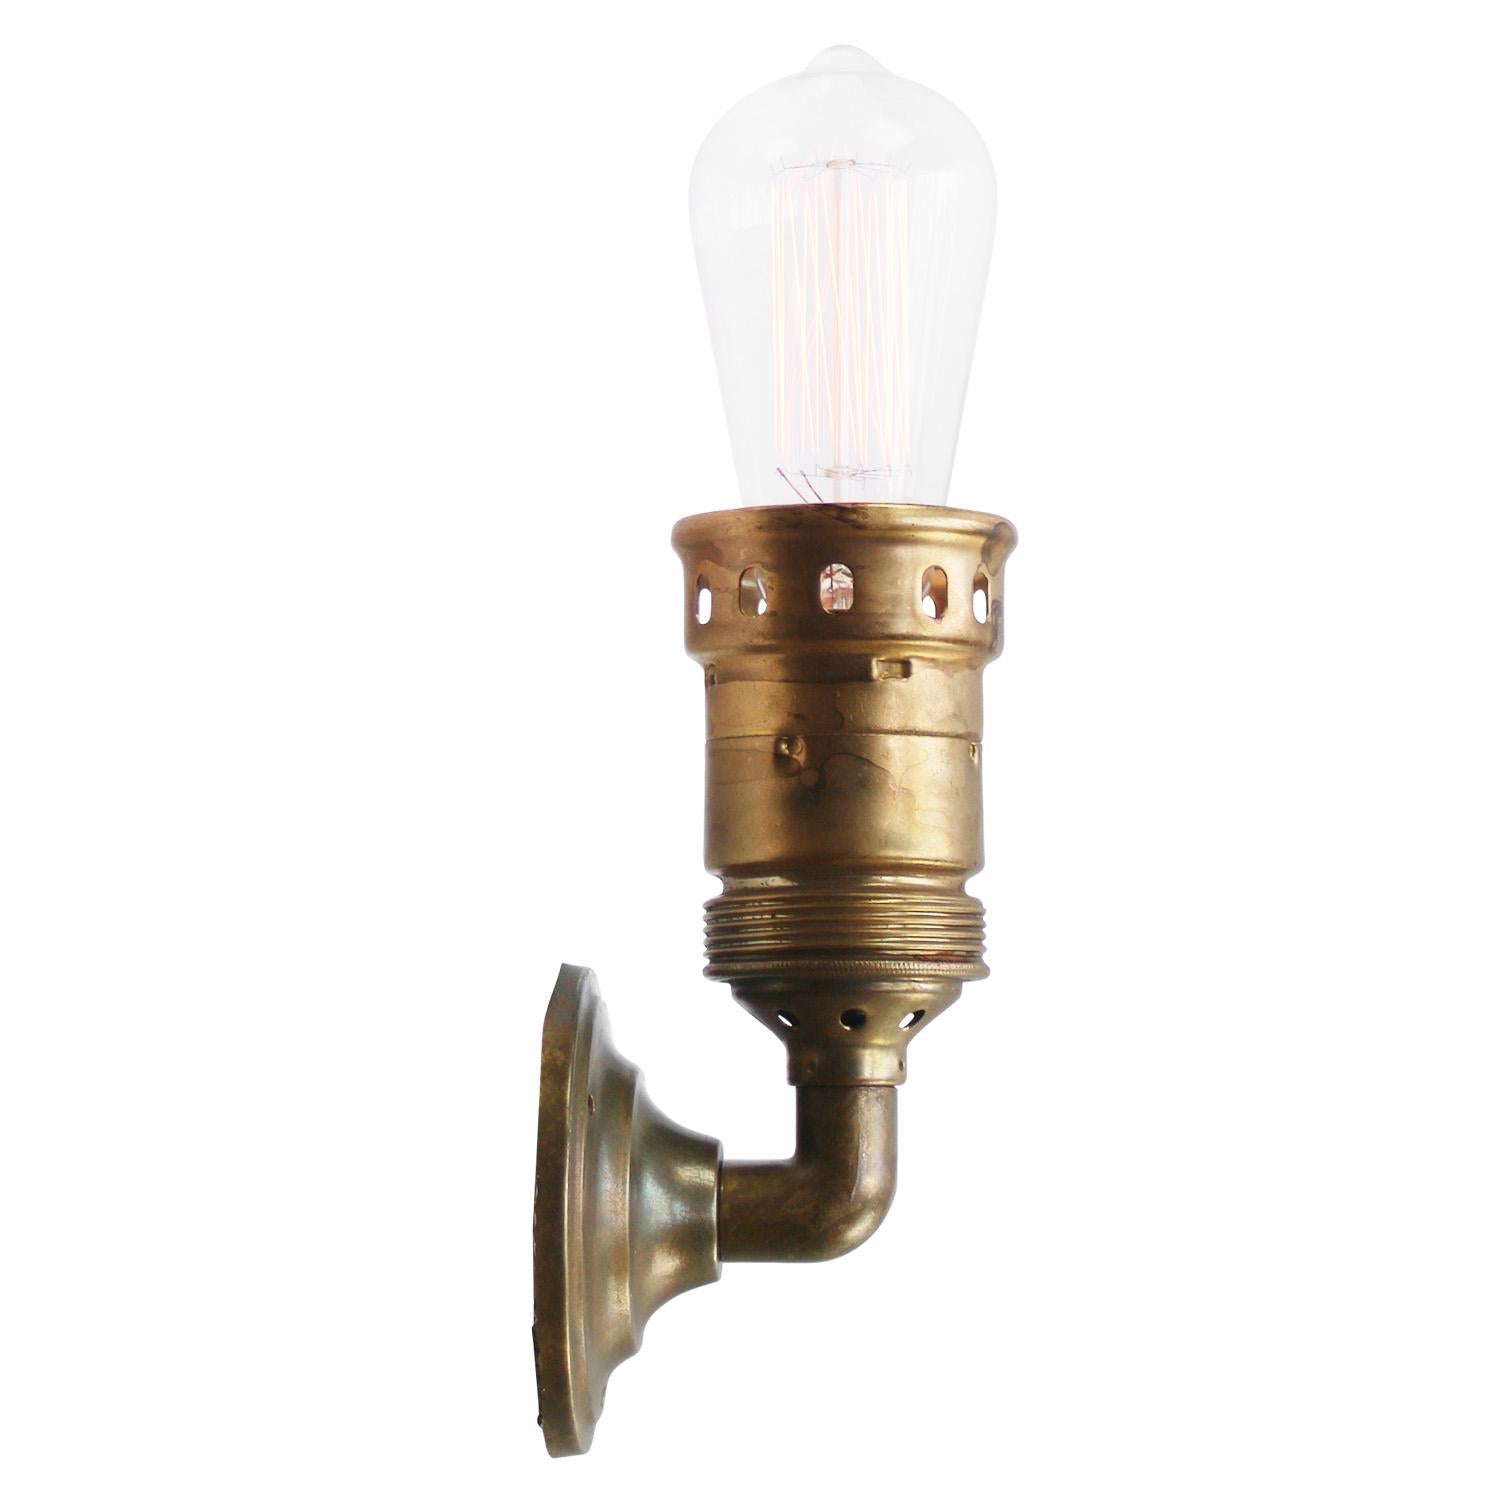 Brass scone wall Lamp 

diameter brass wall mount: 10 cm / 3.94, 3 holes to secure

Weight: 0.75 kg / 1.7 lb

Priced per individual item. All lamps have been made suitable by international standards for incandescent light bulbs, energy-efficient and